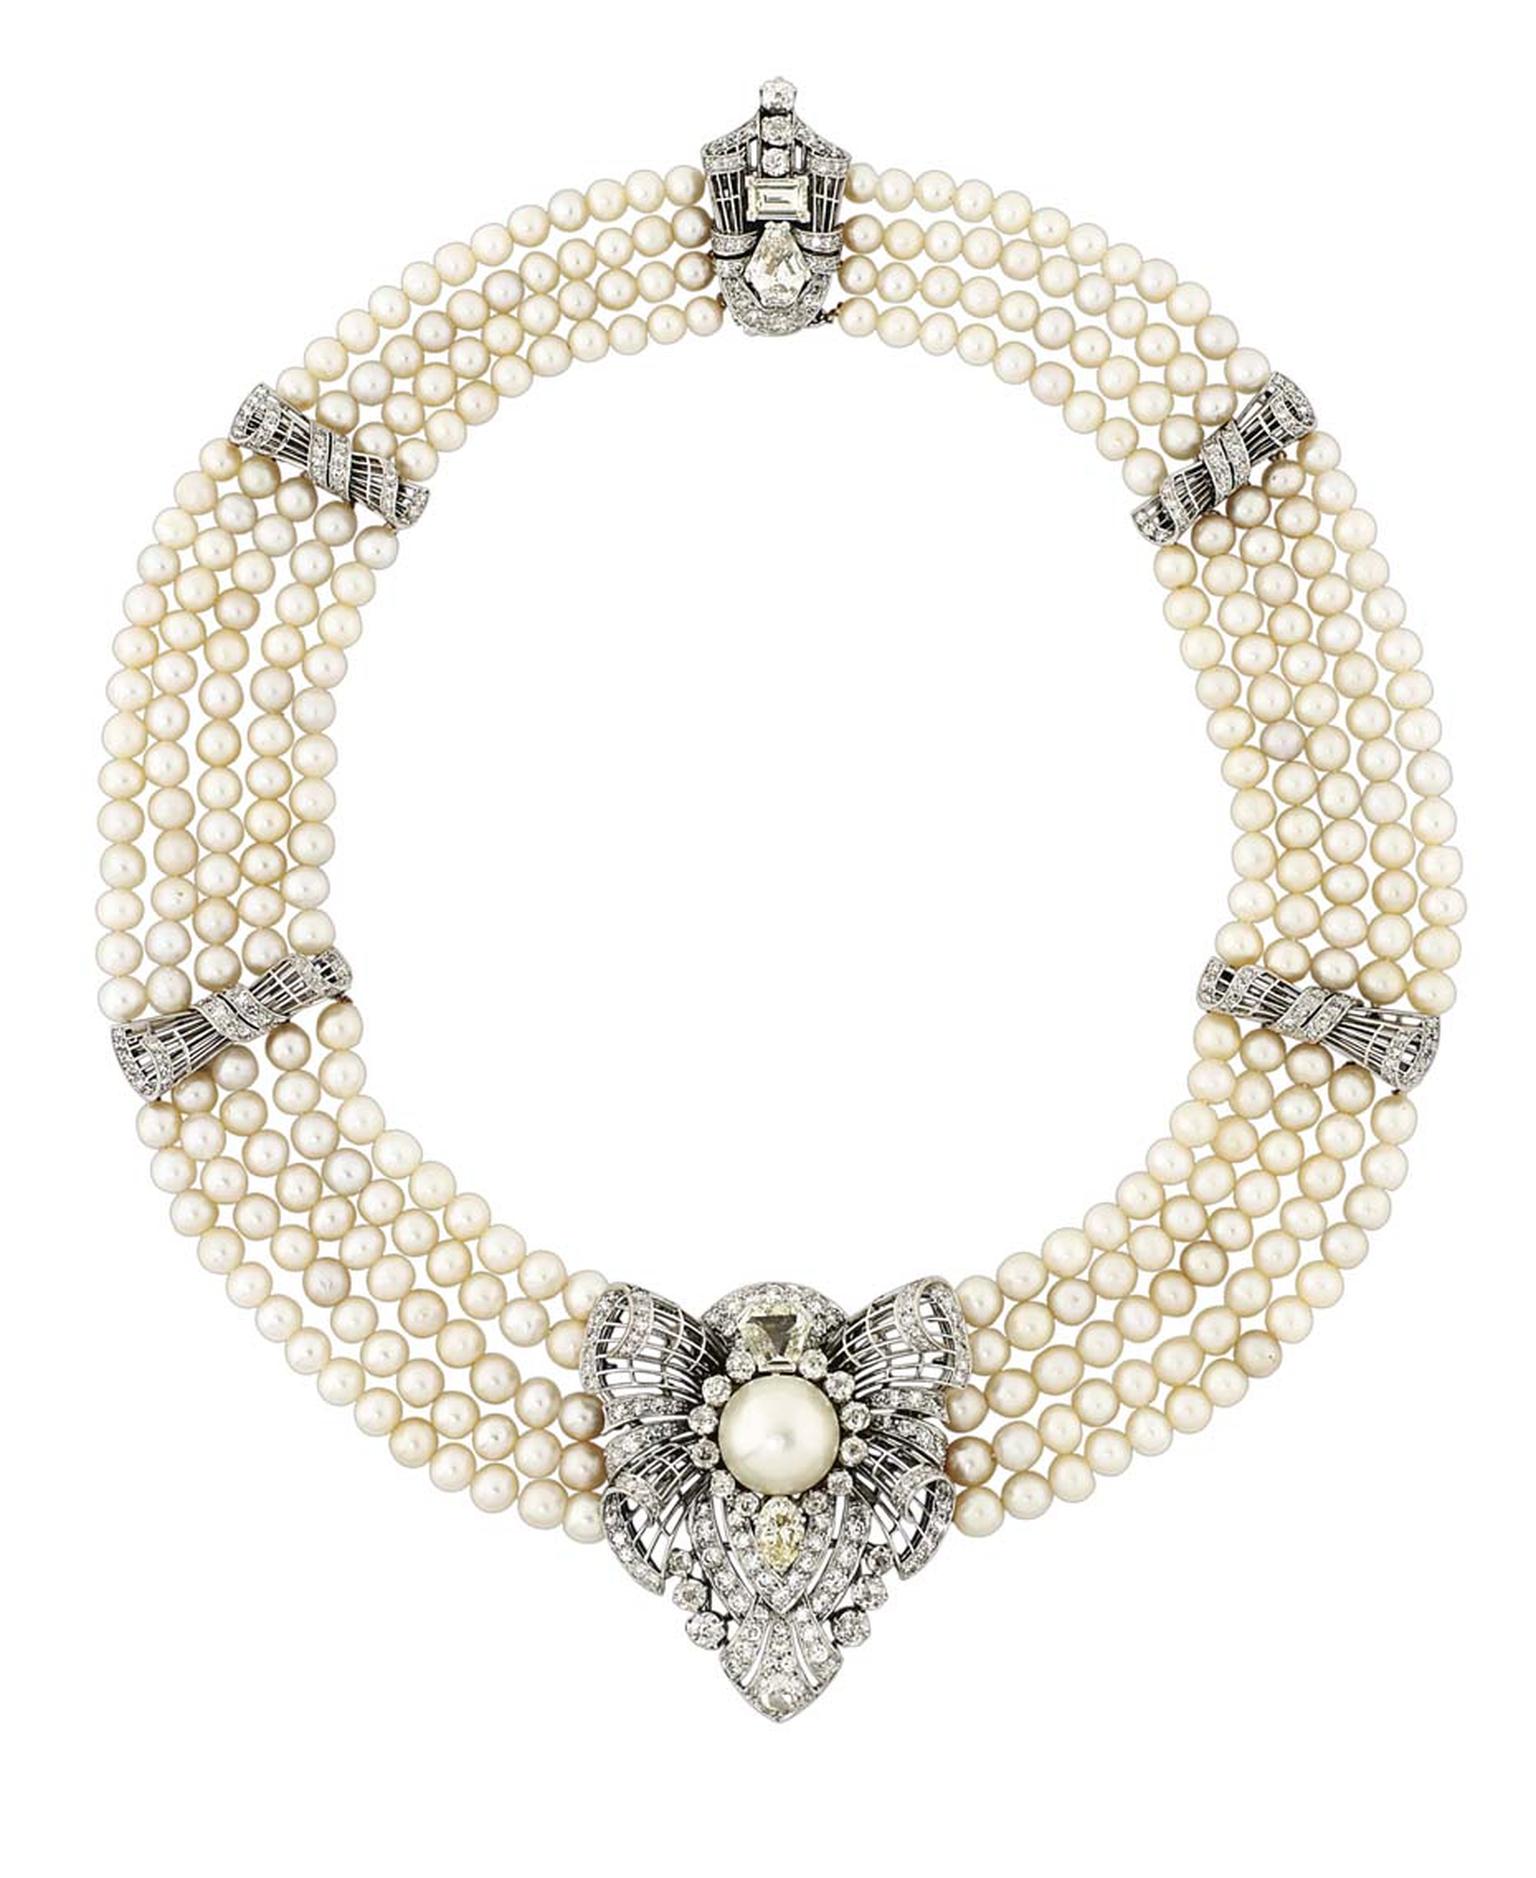 This five-strand natural pearl necklace with a central diamond-set pendant that can be removed and worn as a brooch, sold for £182,500 (estimate: £80,000-100,000) sold at Christies in November 2014.